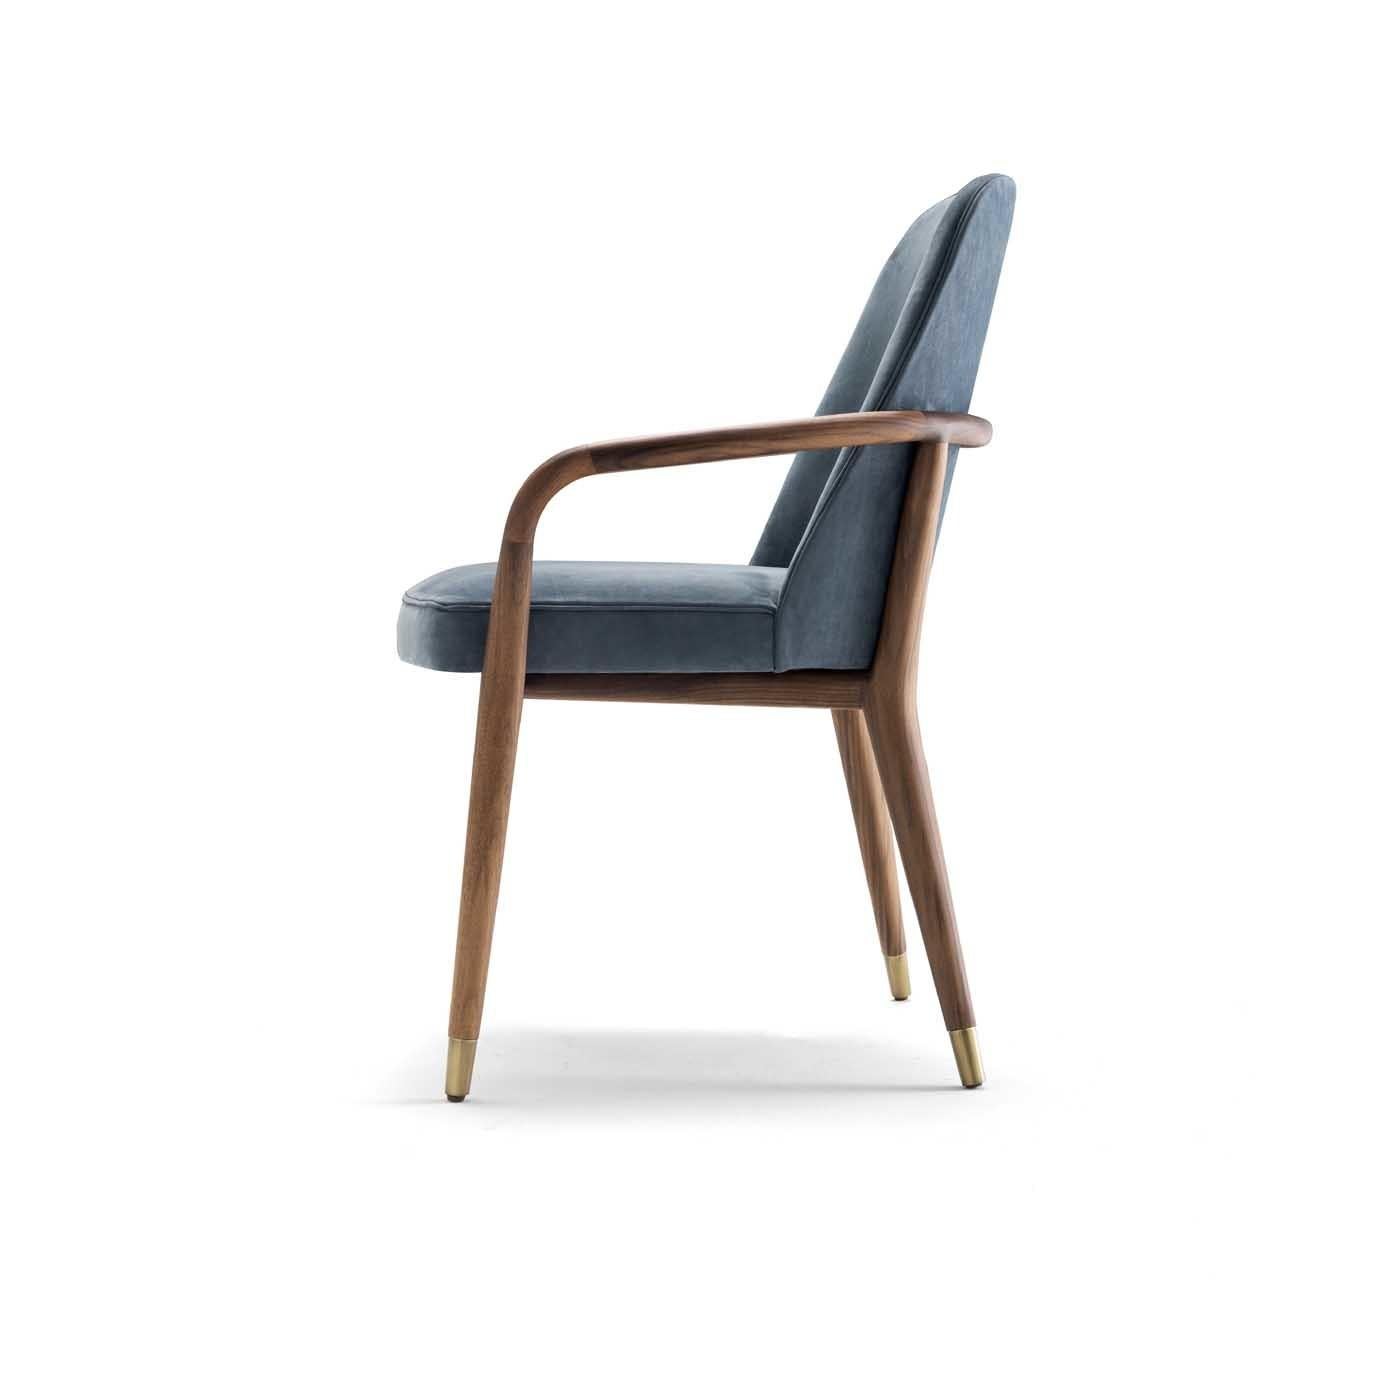 This elegant chair with armrests will add charm and elegance to a modern dining room or study. Its midcentury inspired design features a frame in solid American walnut boasting slanted back legs, and open armrests and metal feet with a satin brass